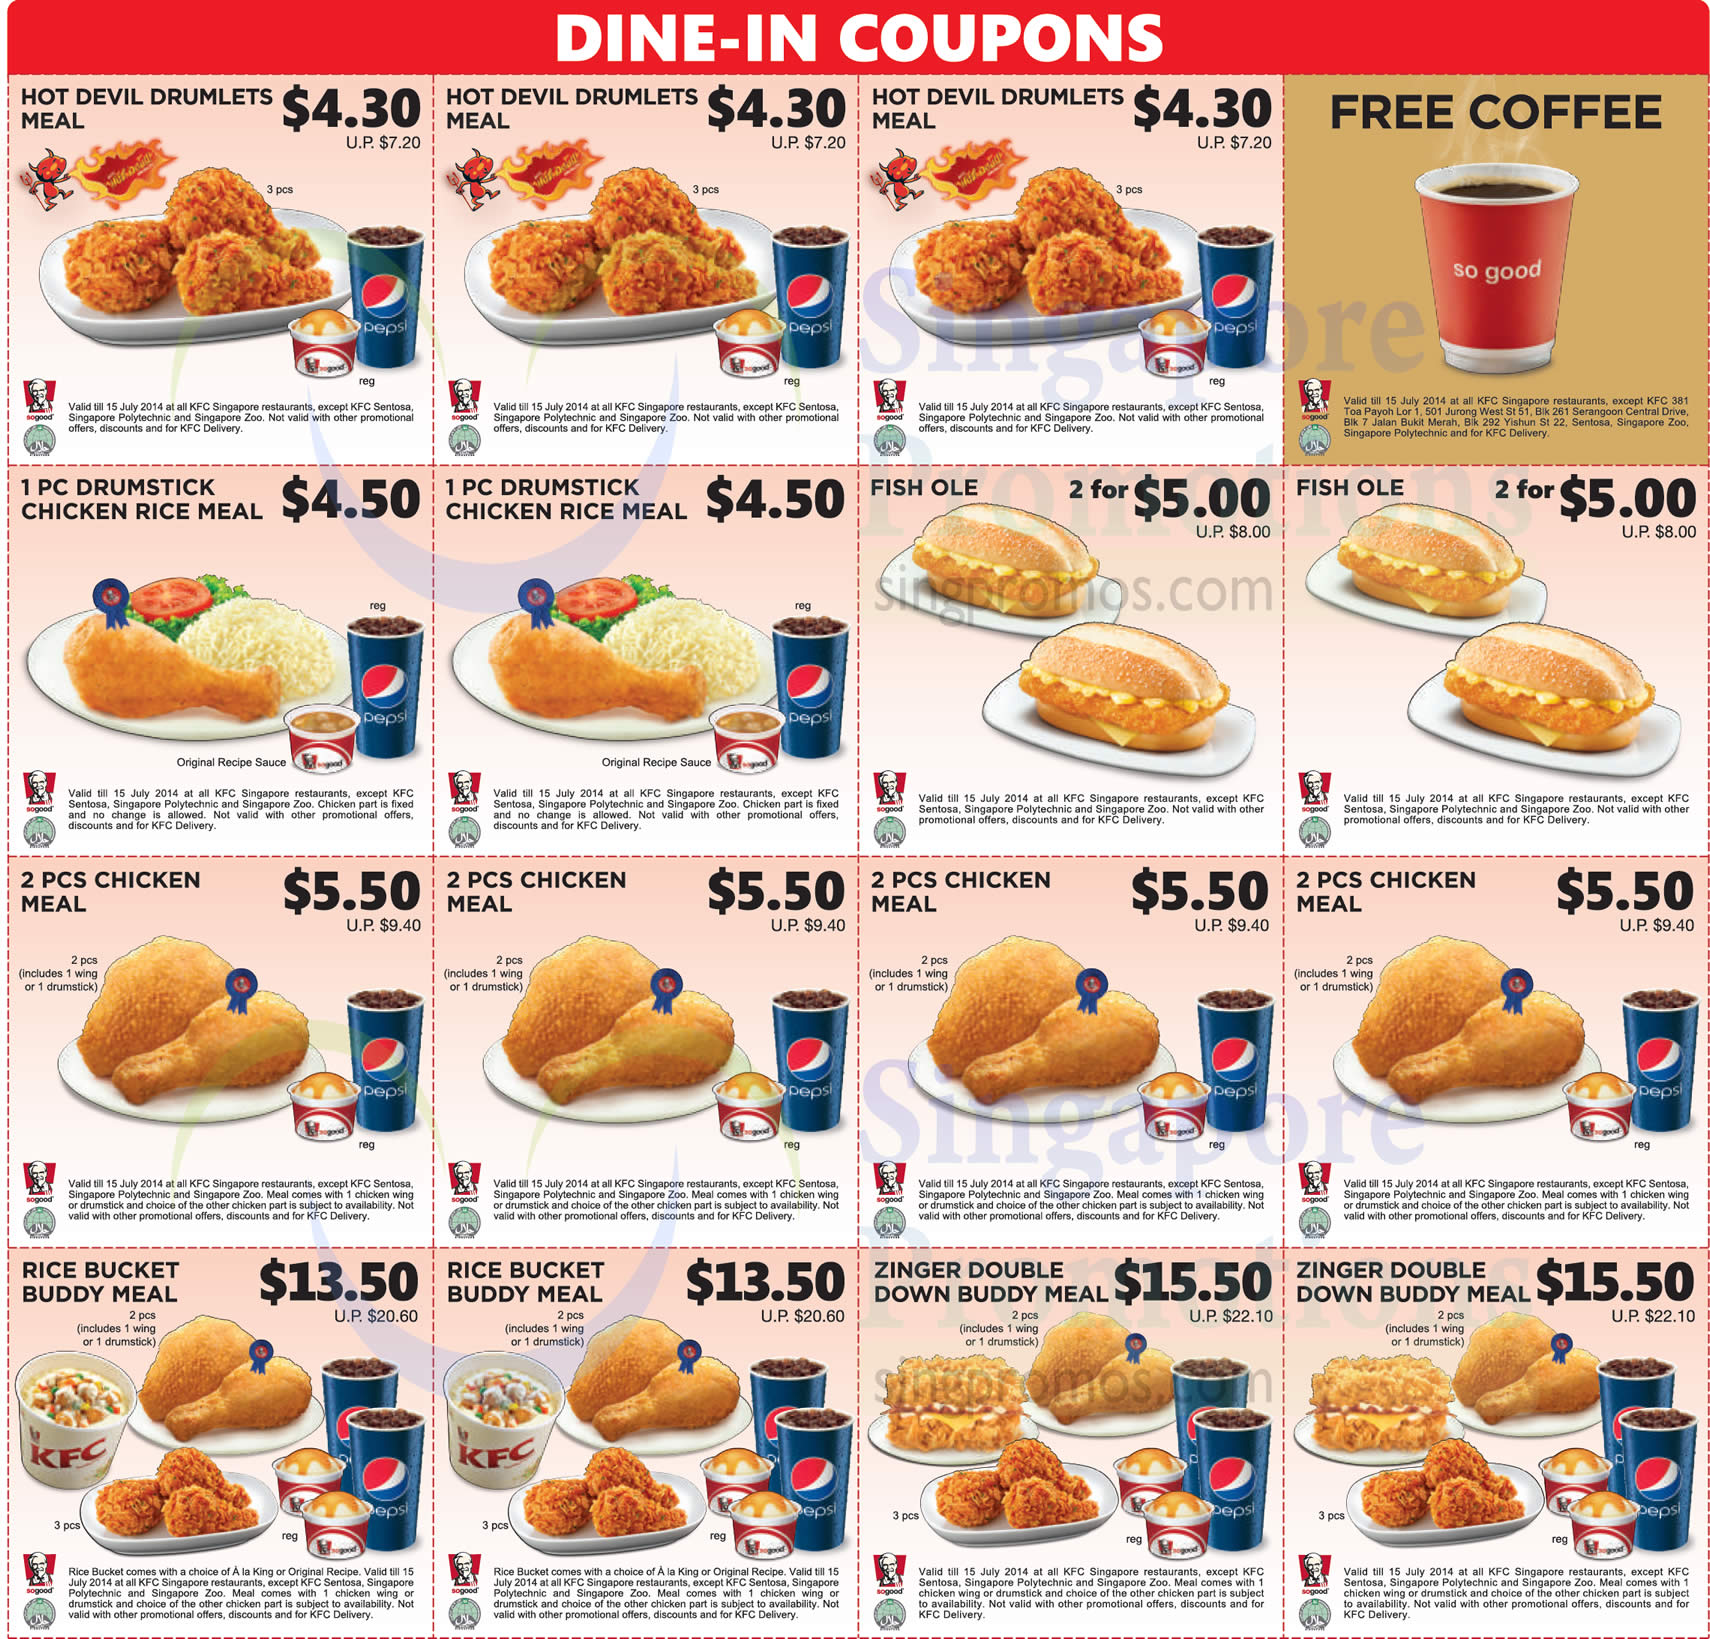 All Dine-In Coupons Printable » KFC Dine-In Discount Coupons (& FREE ...